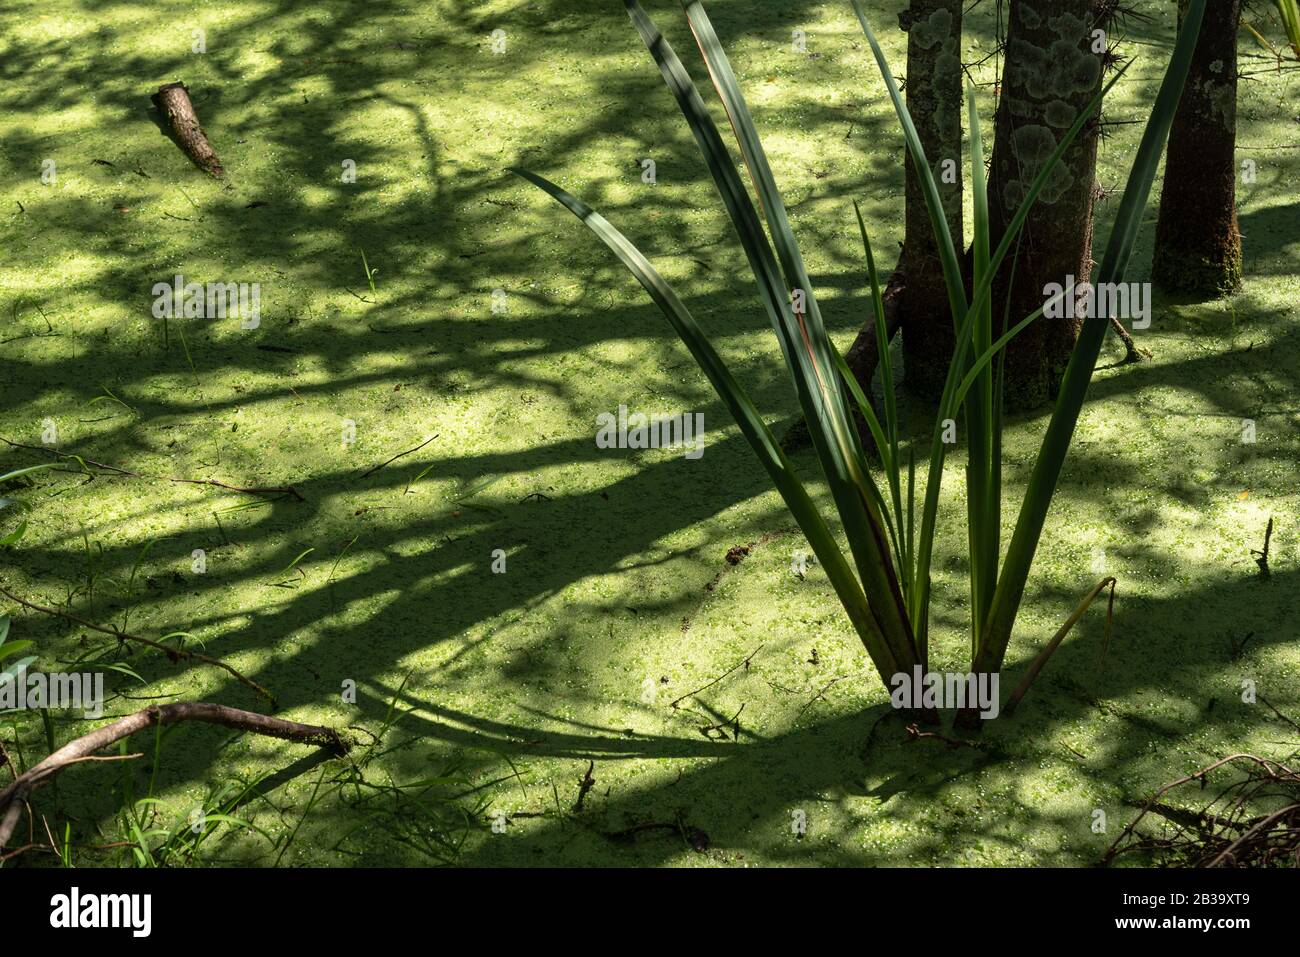 Duckweed growing on a swamp with some branches and shadows on top of it. Texture Stock Photo